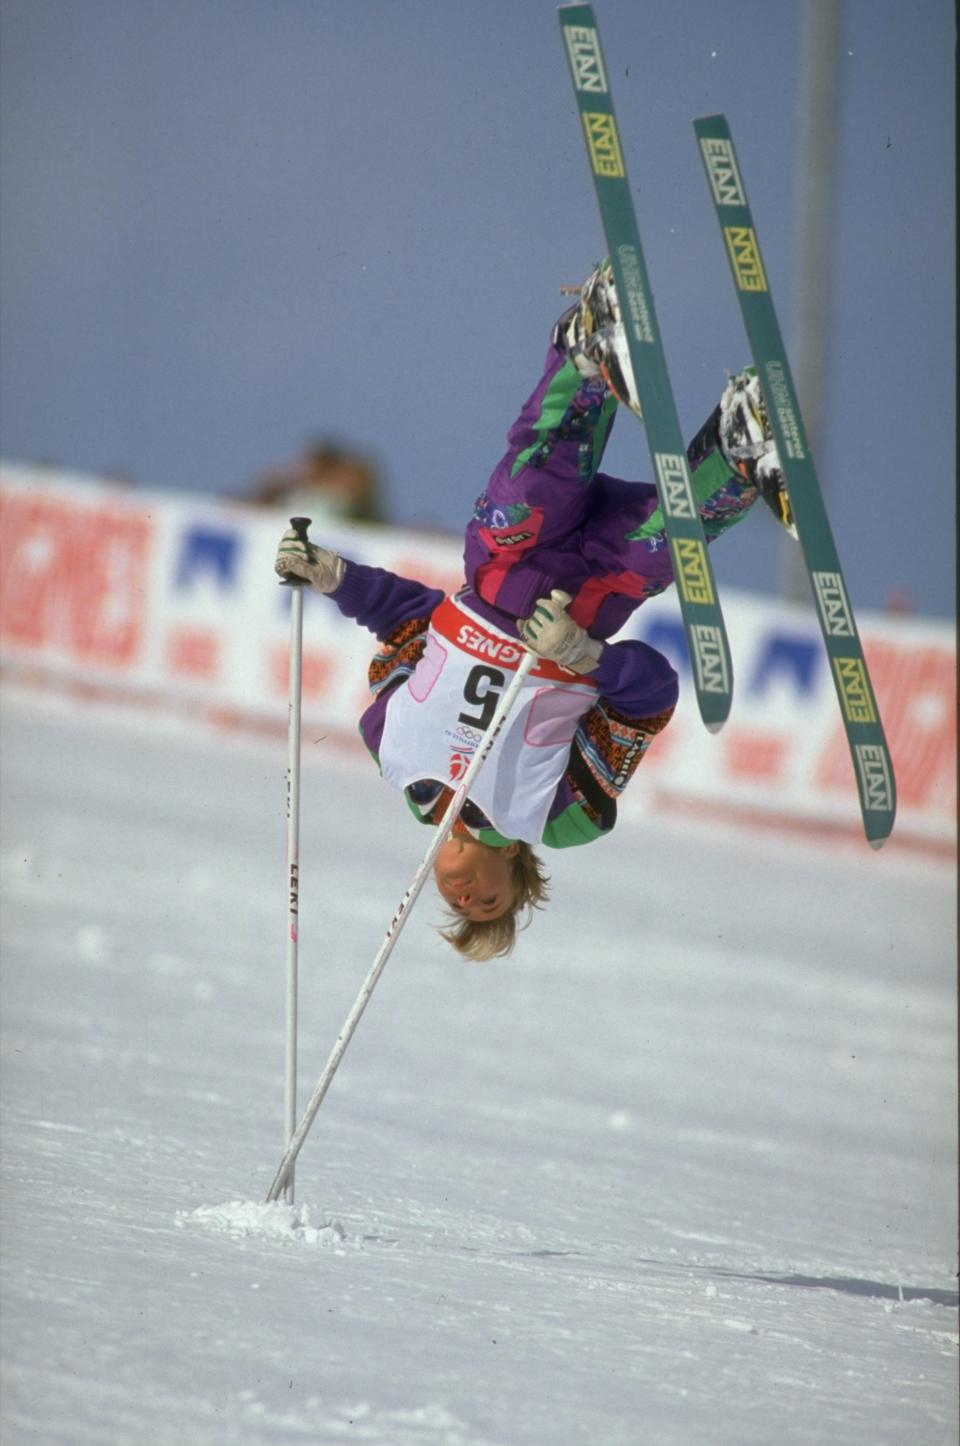 <p>Another demonstration event showcased at the Calgary Games in 1988, ski ballet was more similar to gymnastics than dance, except with skis. It suffered the same fate as skijoring by not becoming an official Olympics sport. </p>